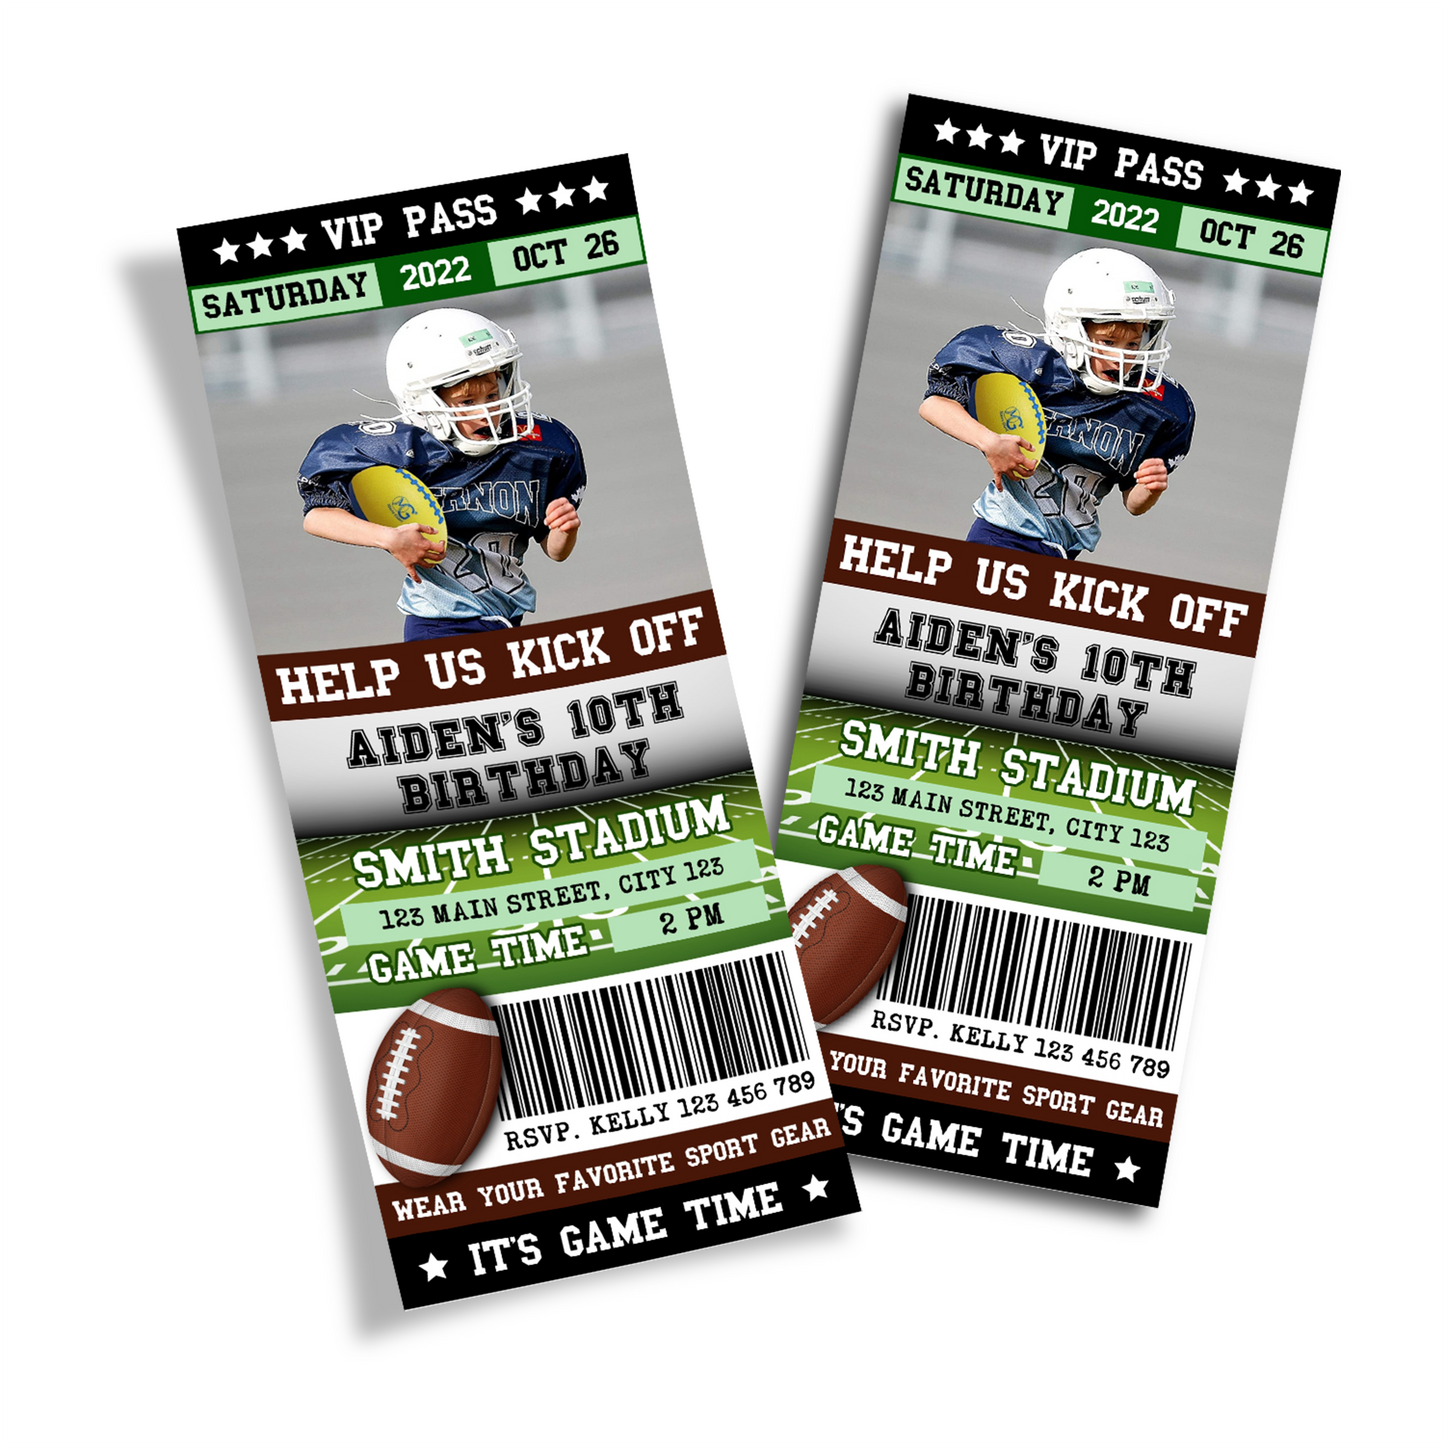 Personalized photo ticket invitations with a Football theme